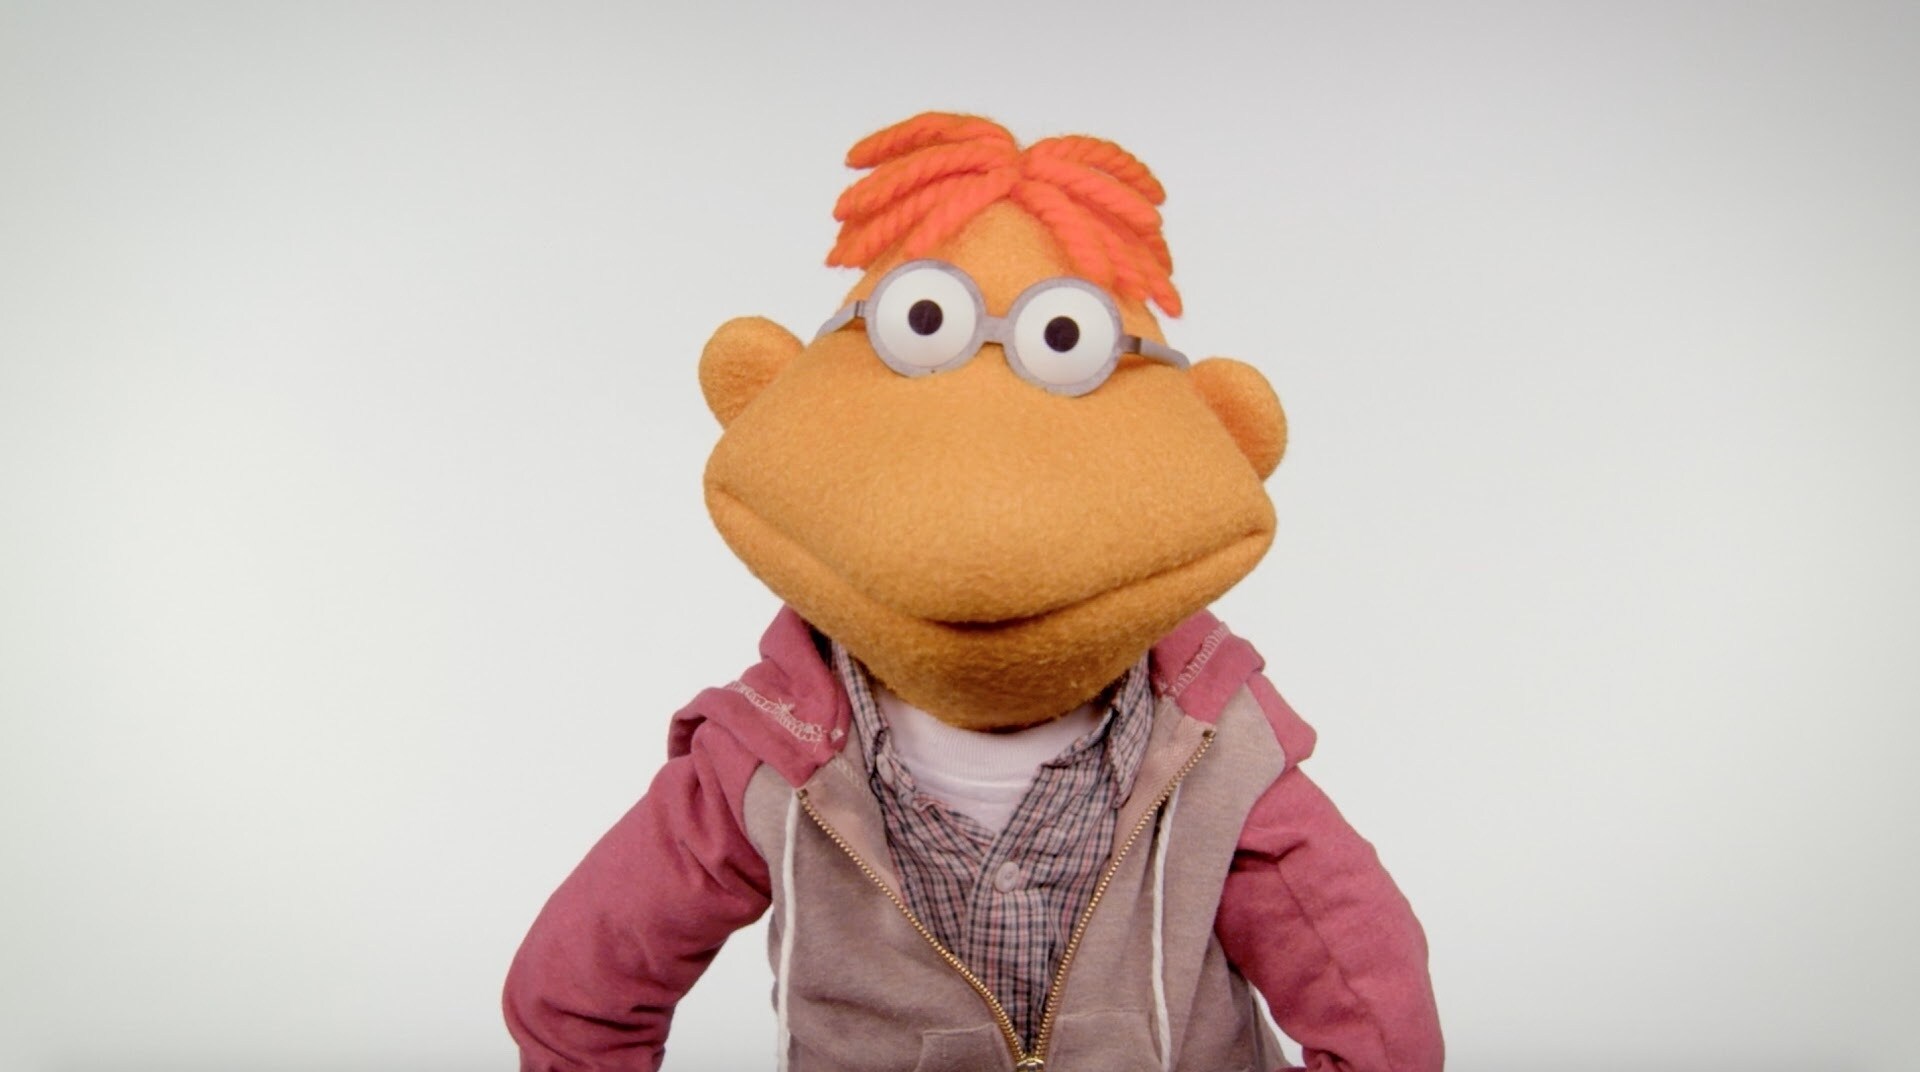 Can Scooter Interest You in a Thought? | Muppet Thought of the Week by The Muppets